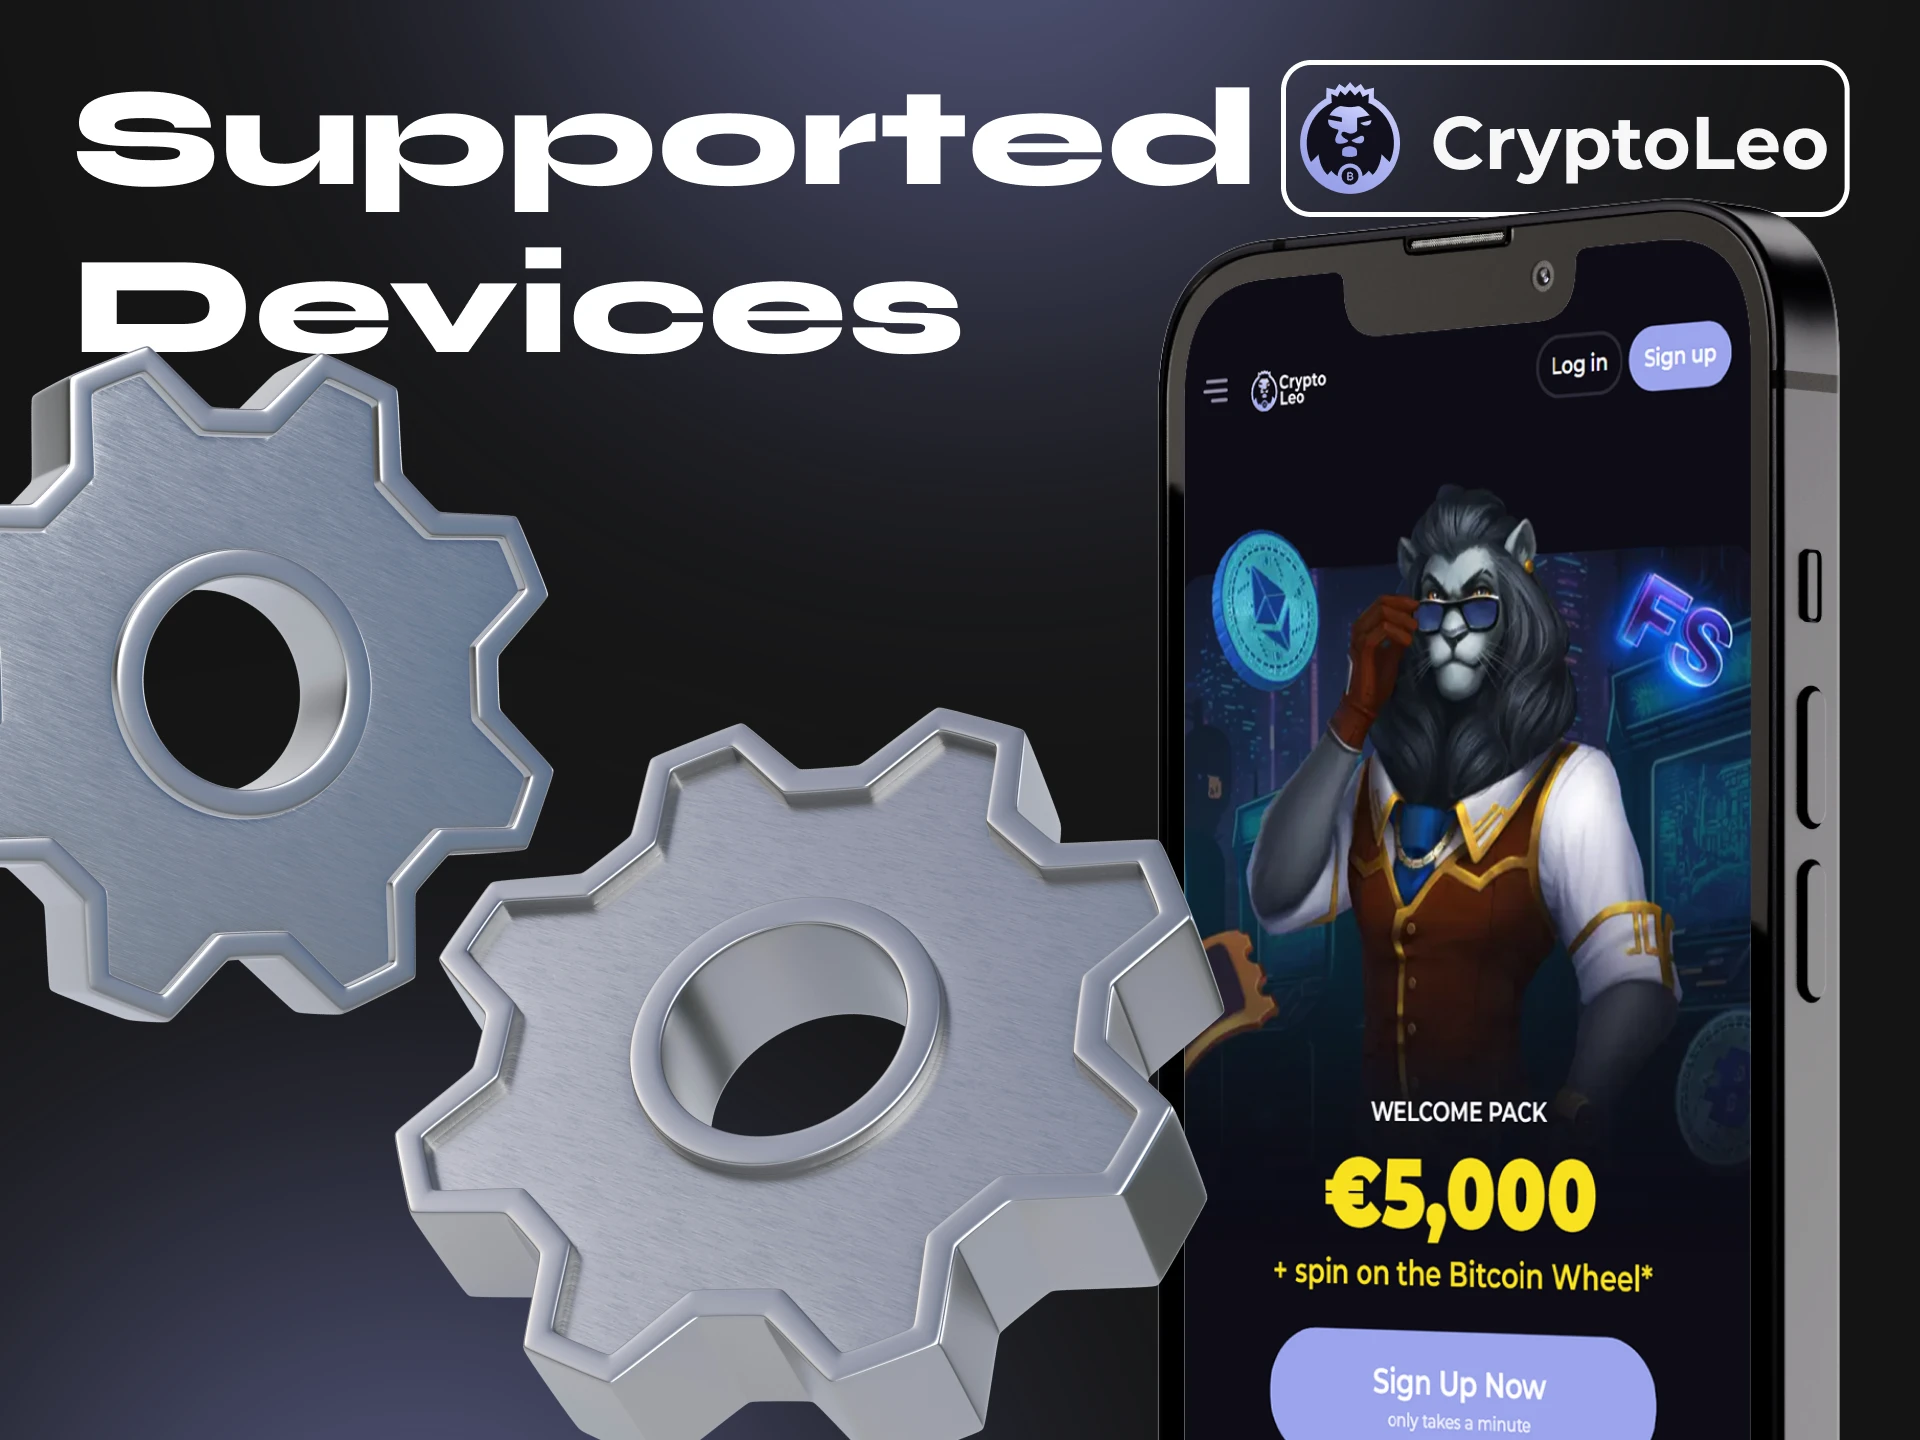 The Cryptoleo app supports all iOS devices.